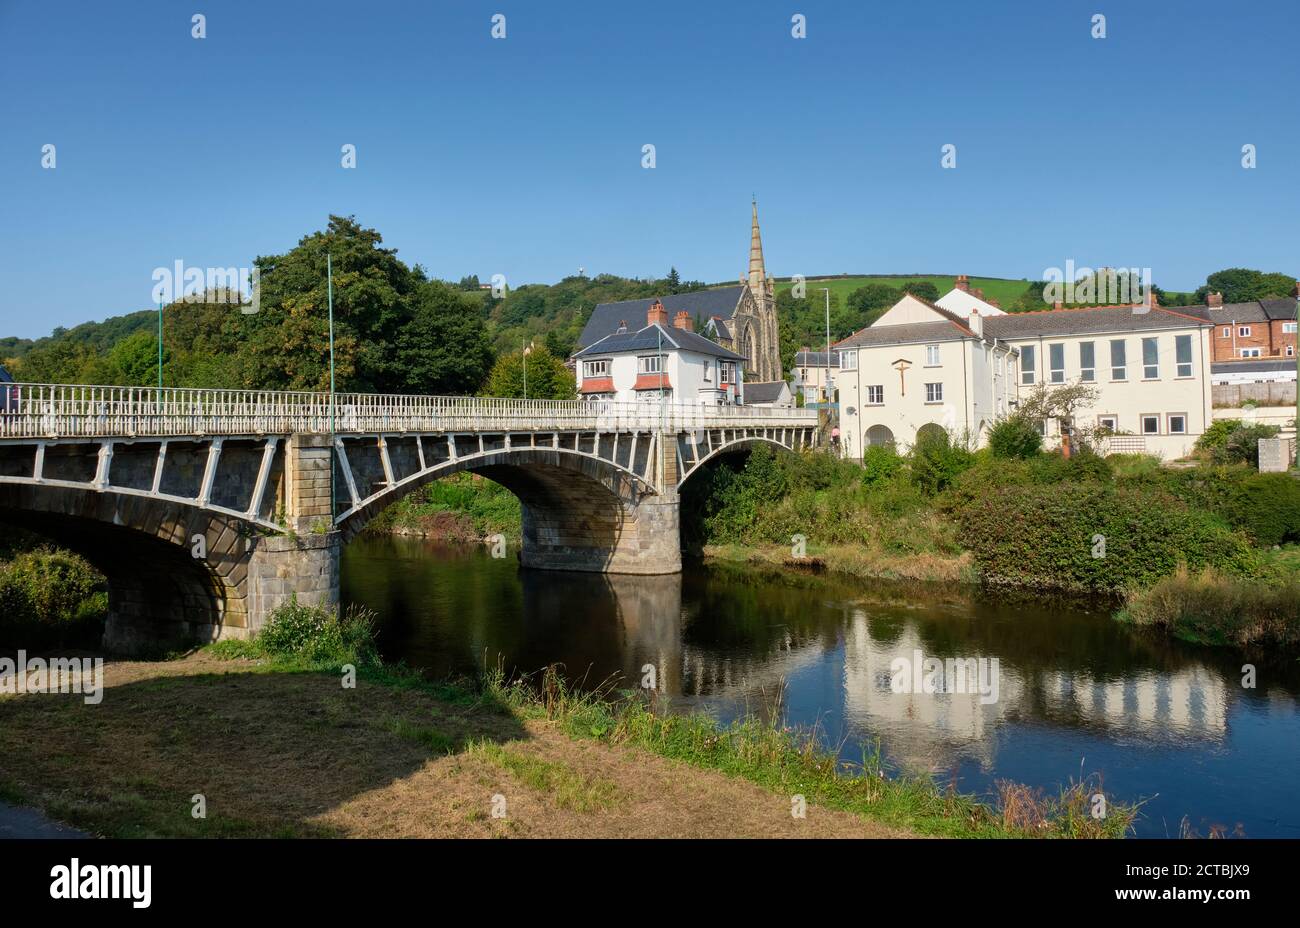 Ponte sul fiume Severn a Newtown, Powys, Galles Foto Stock